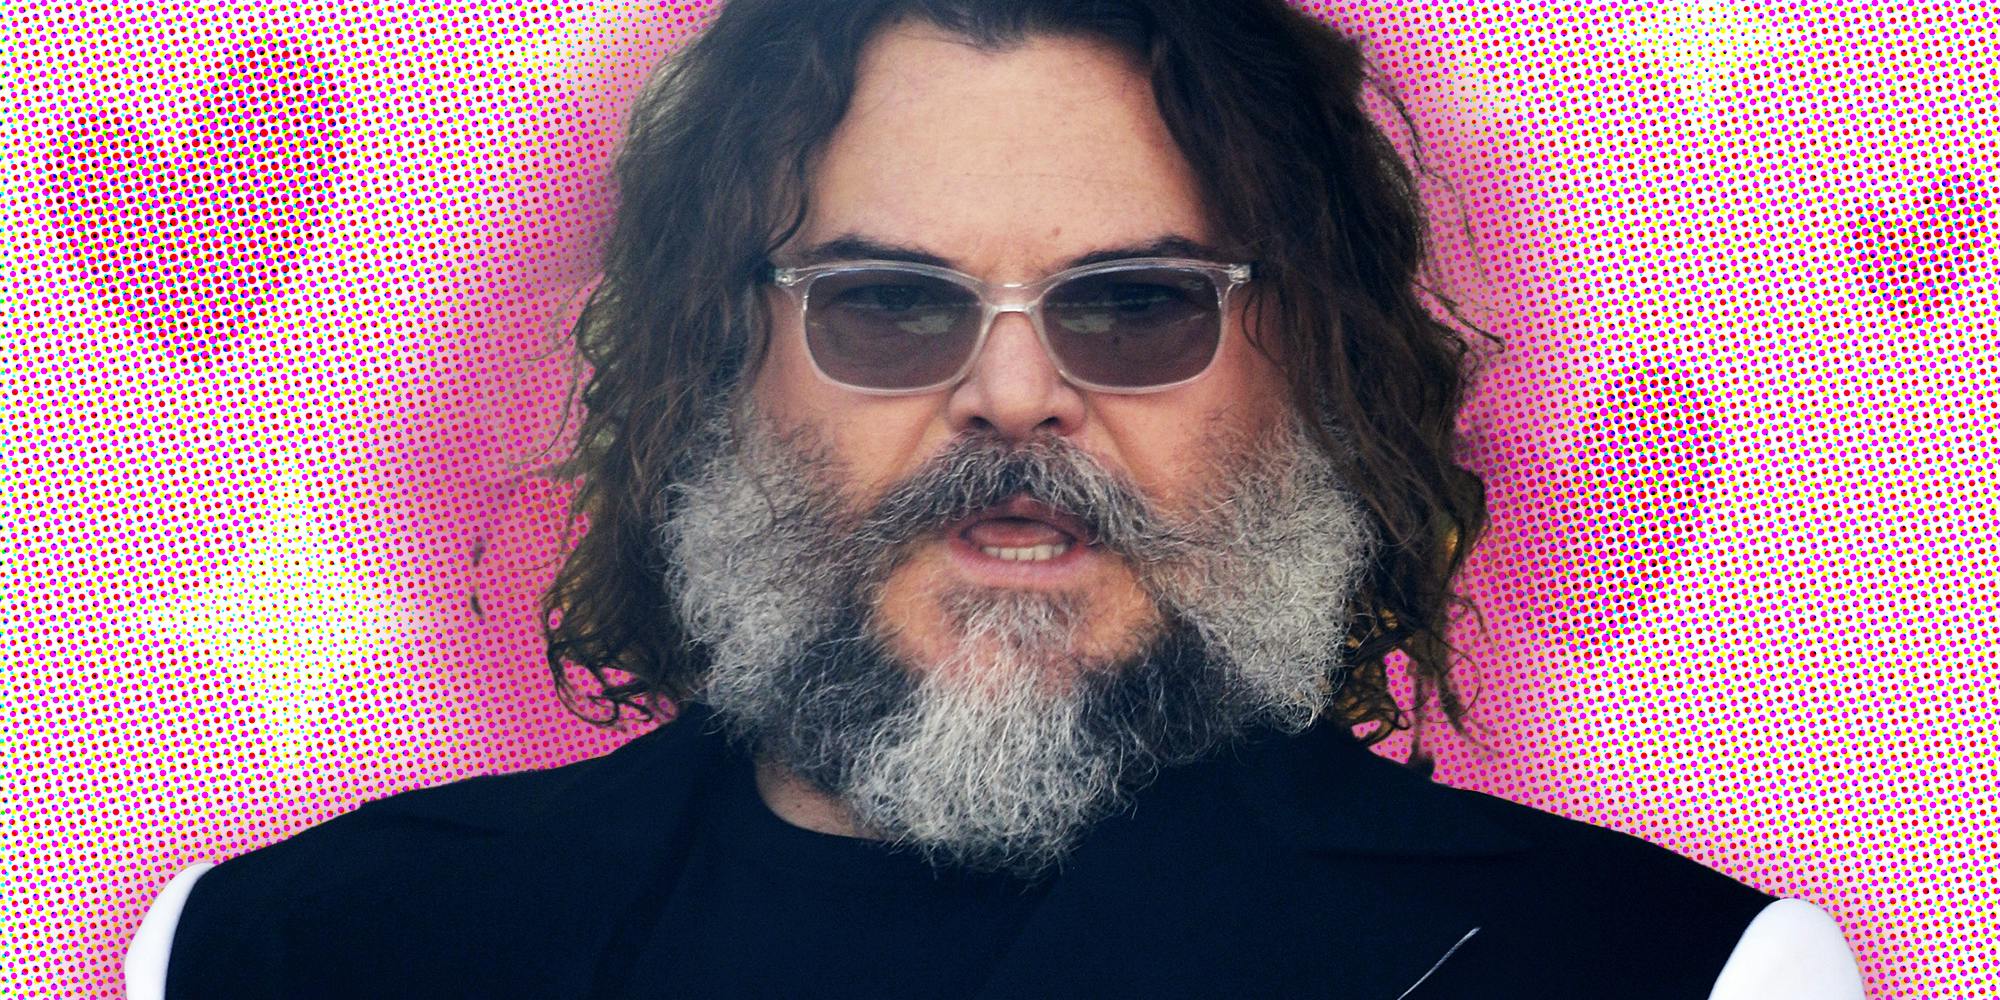 Jack Black in front of heart background